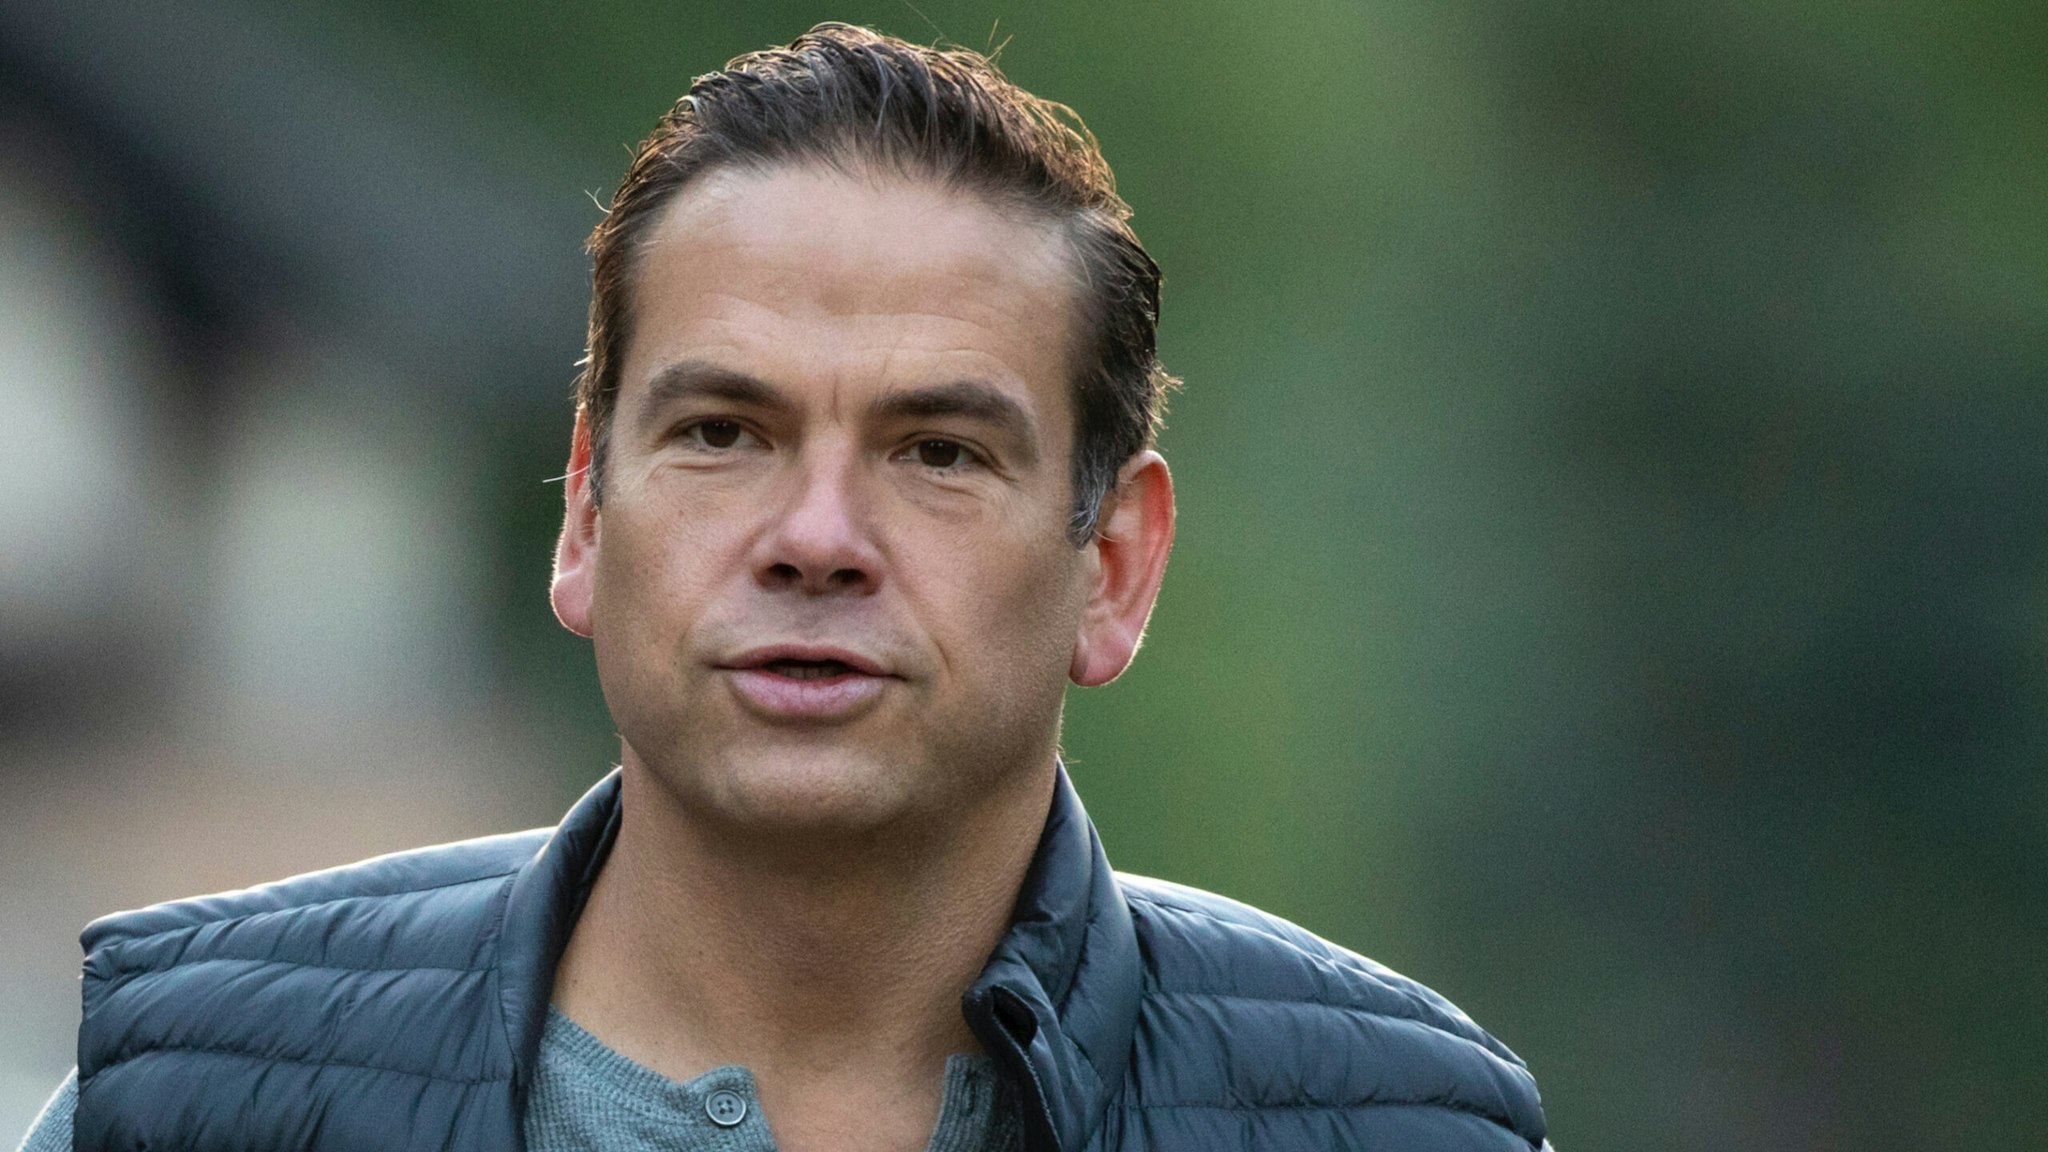 Lachlan Murdoch, chief executive officer of Fox Corporation and co-chairman of News Corp, attends the annual Allen & Company Sun Valley Conference, July 11, 2019 in Sun Valley, Idaho.